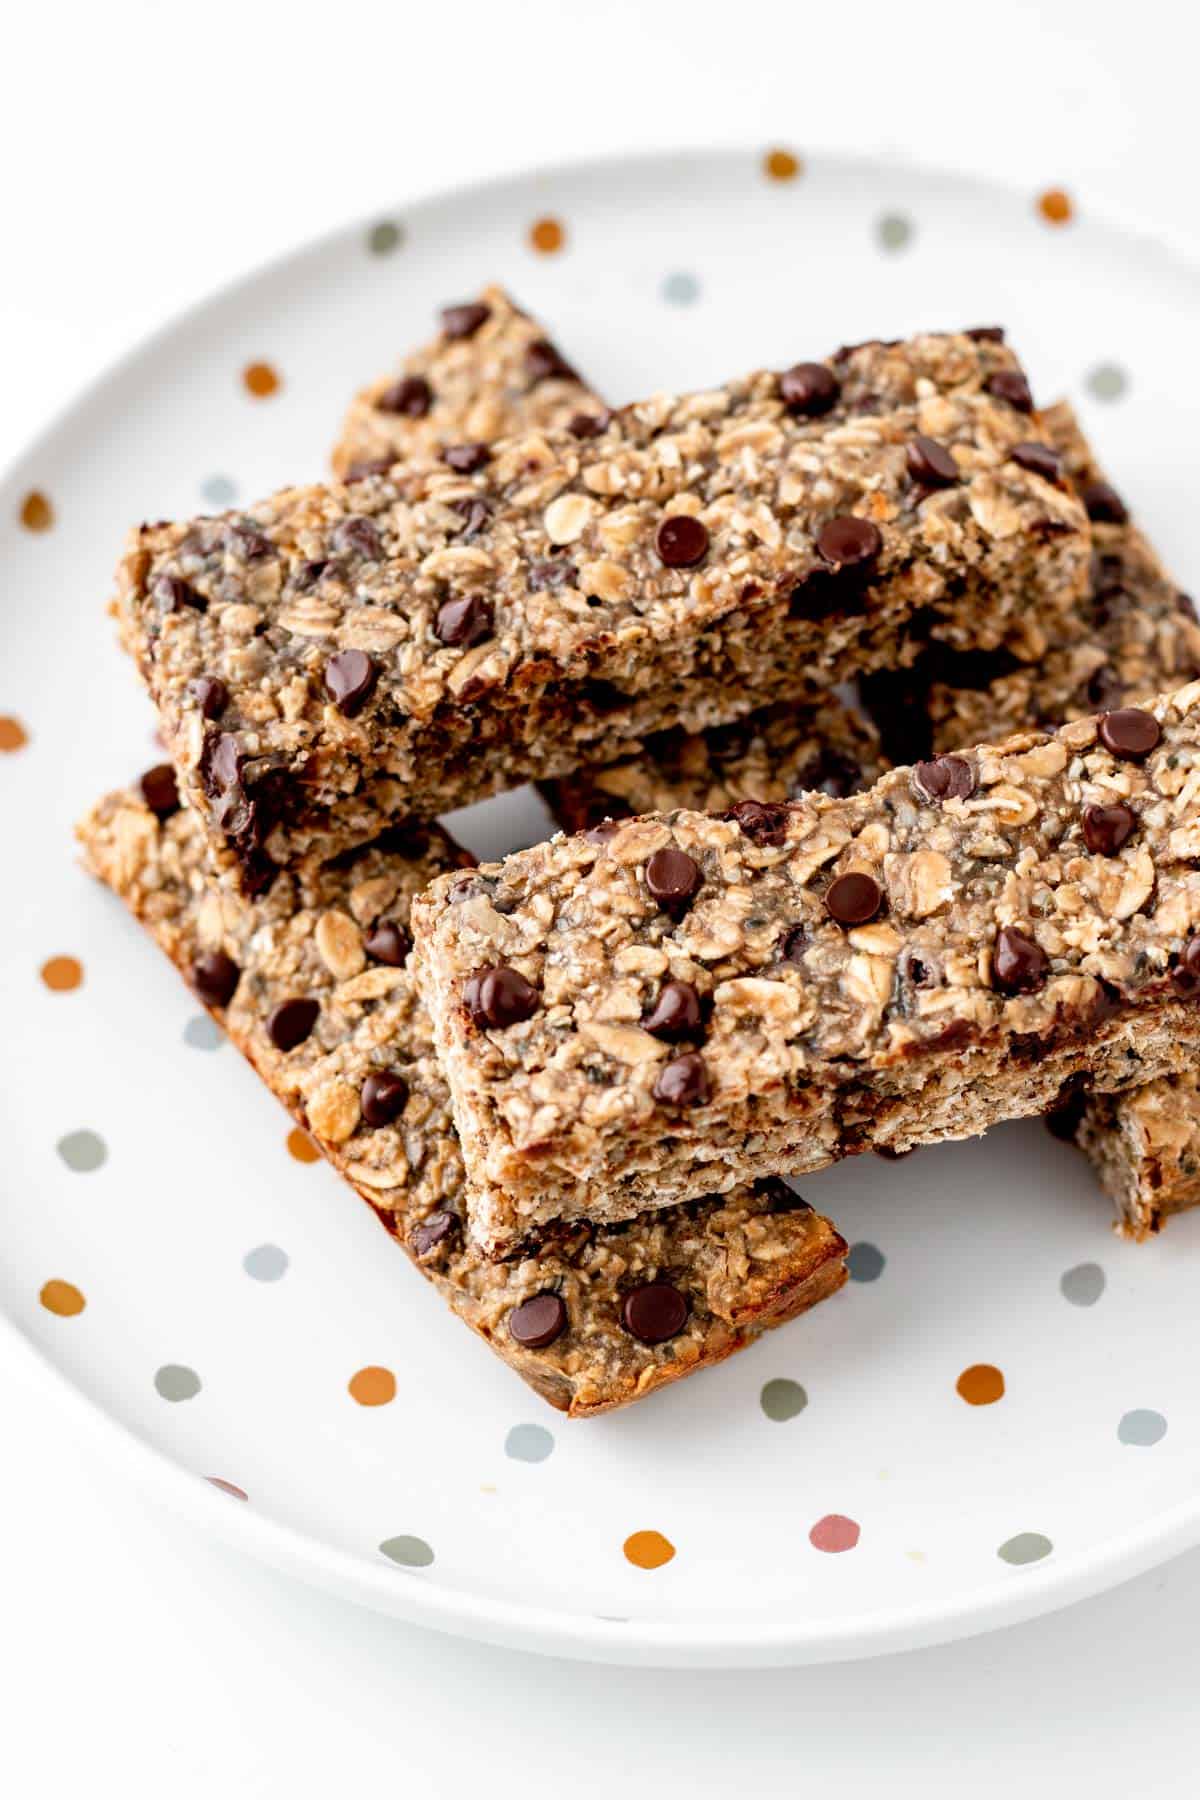 Nut free breakfast bars stacked on top of each other on a polka dot plate.